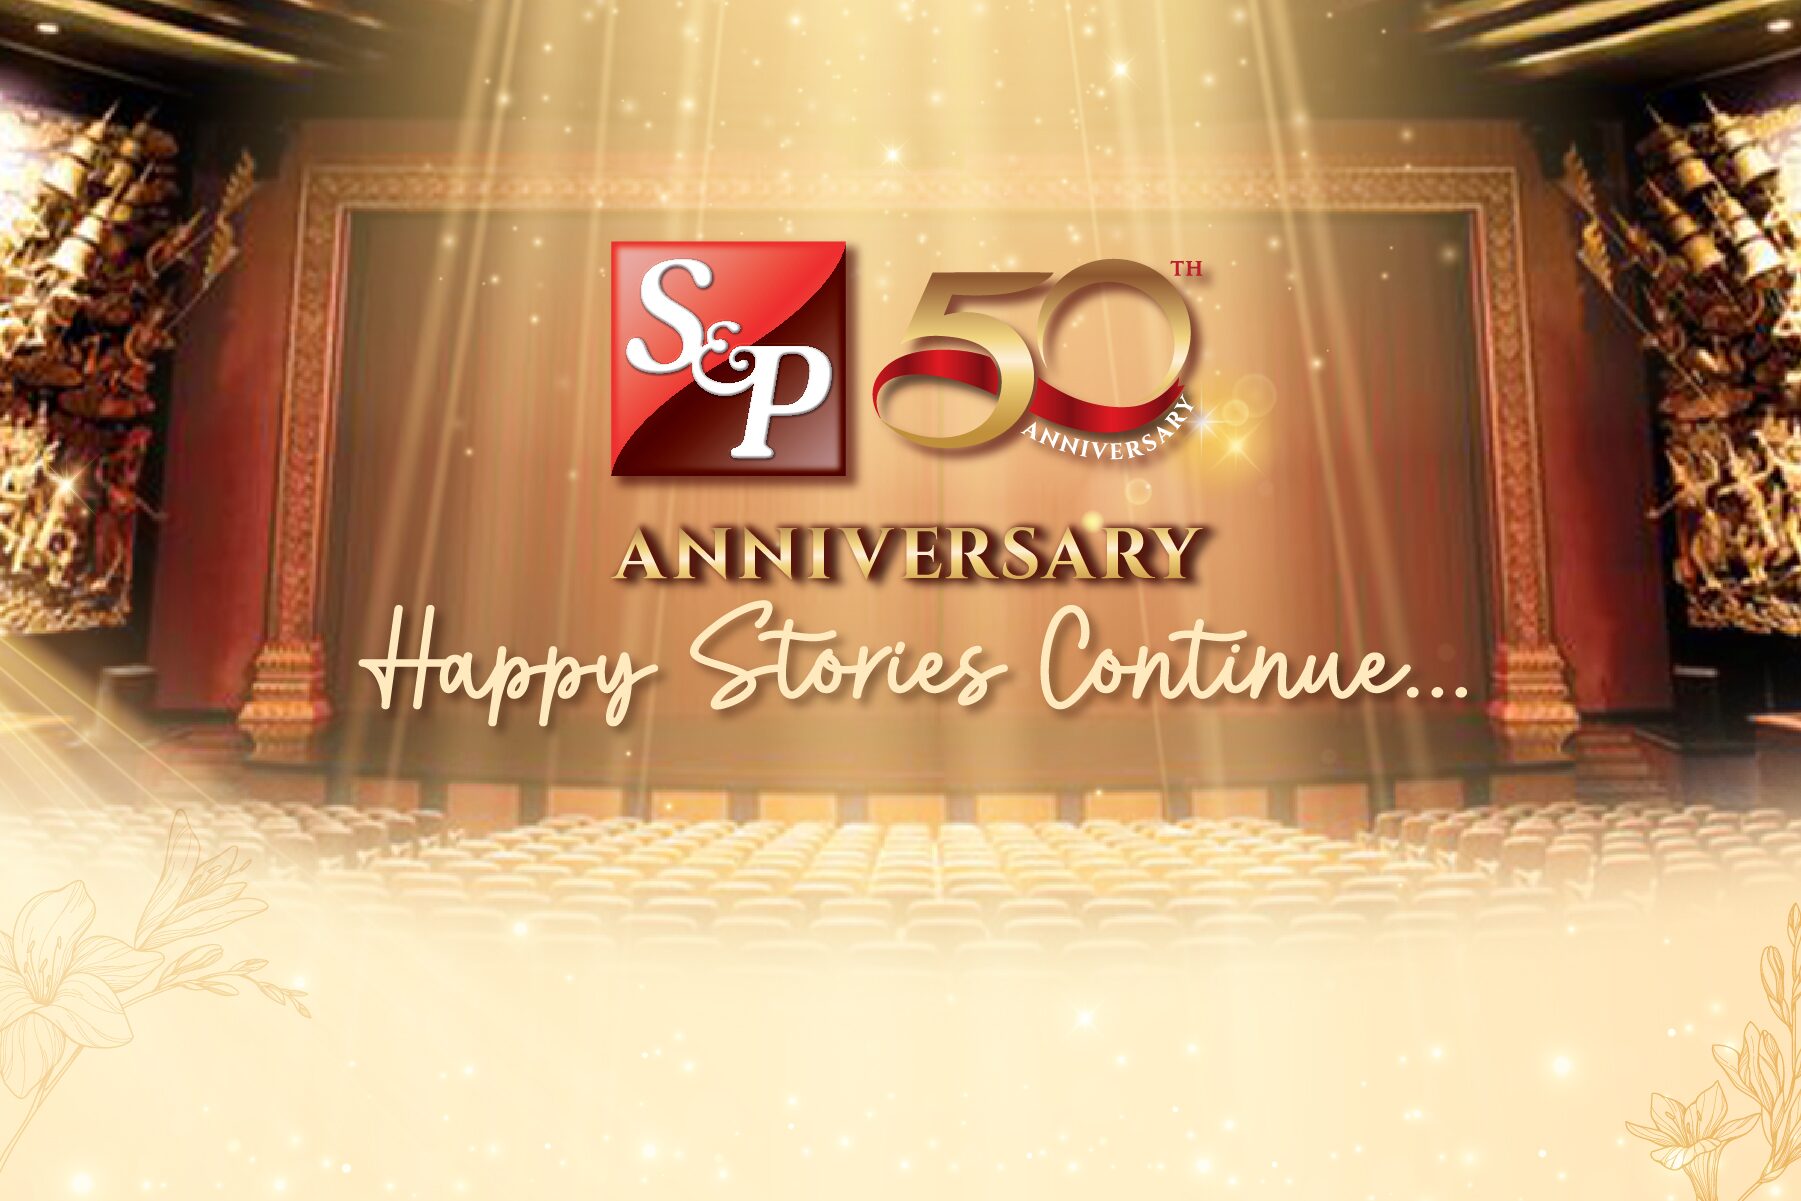 S&P 50th Anniversary Happy Stories Continue…